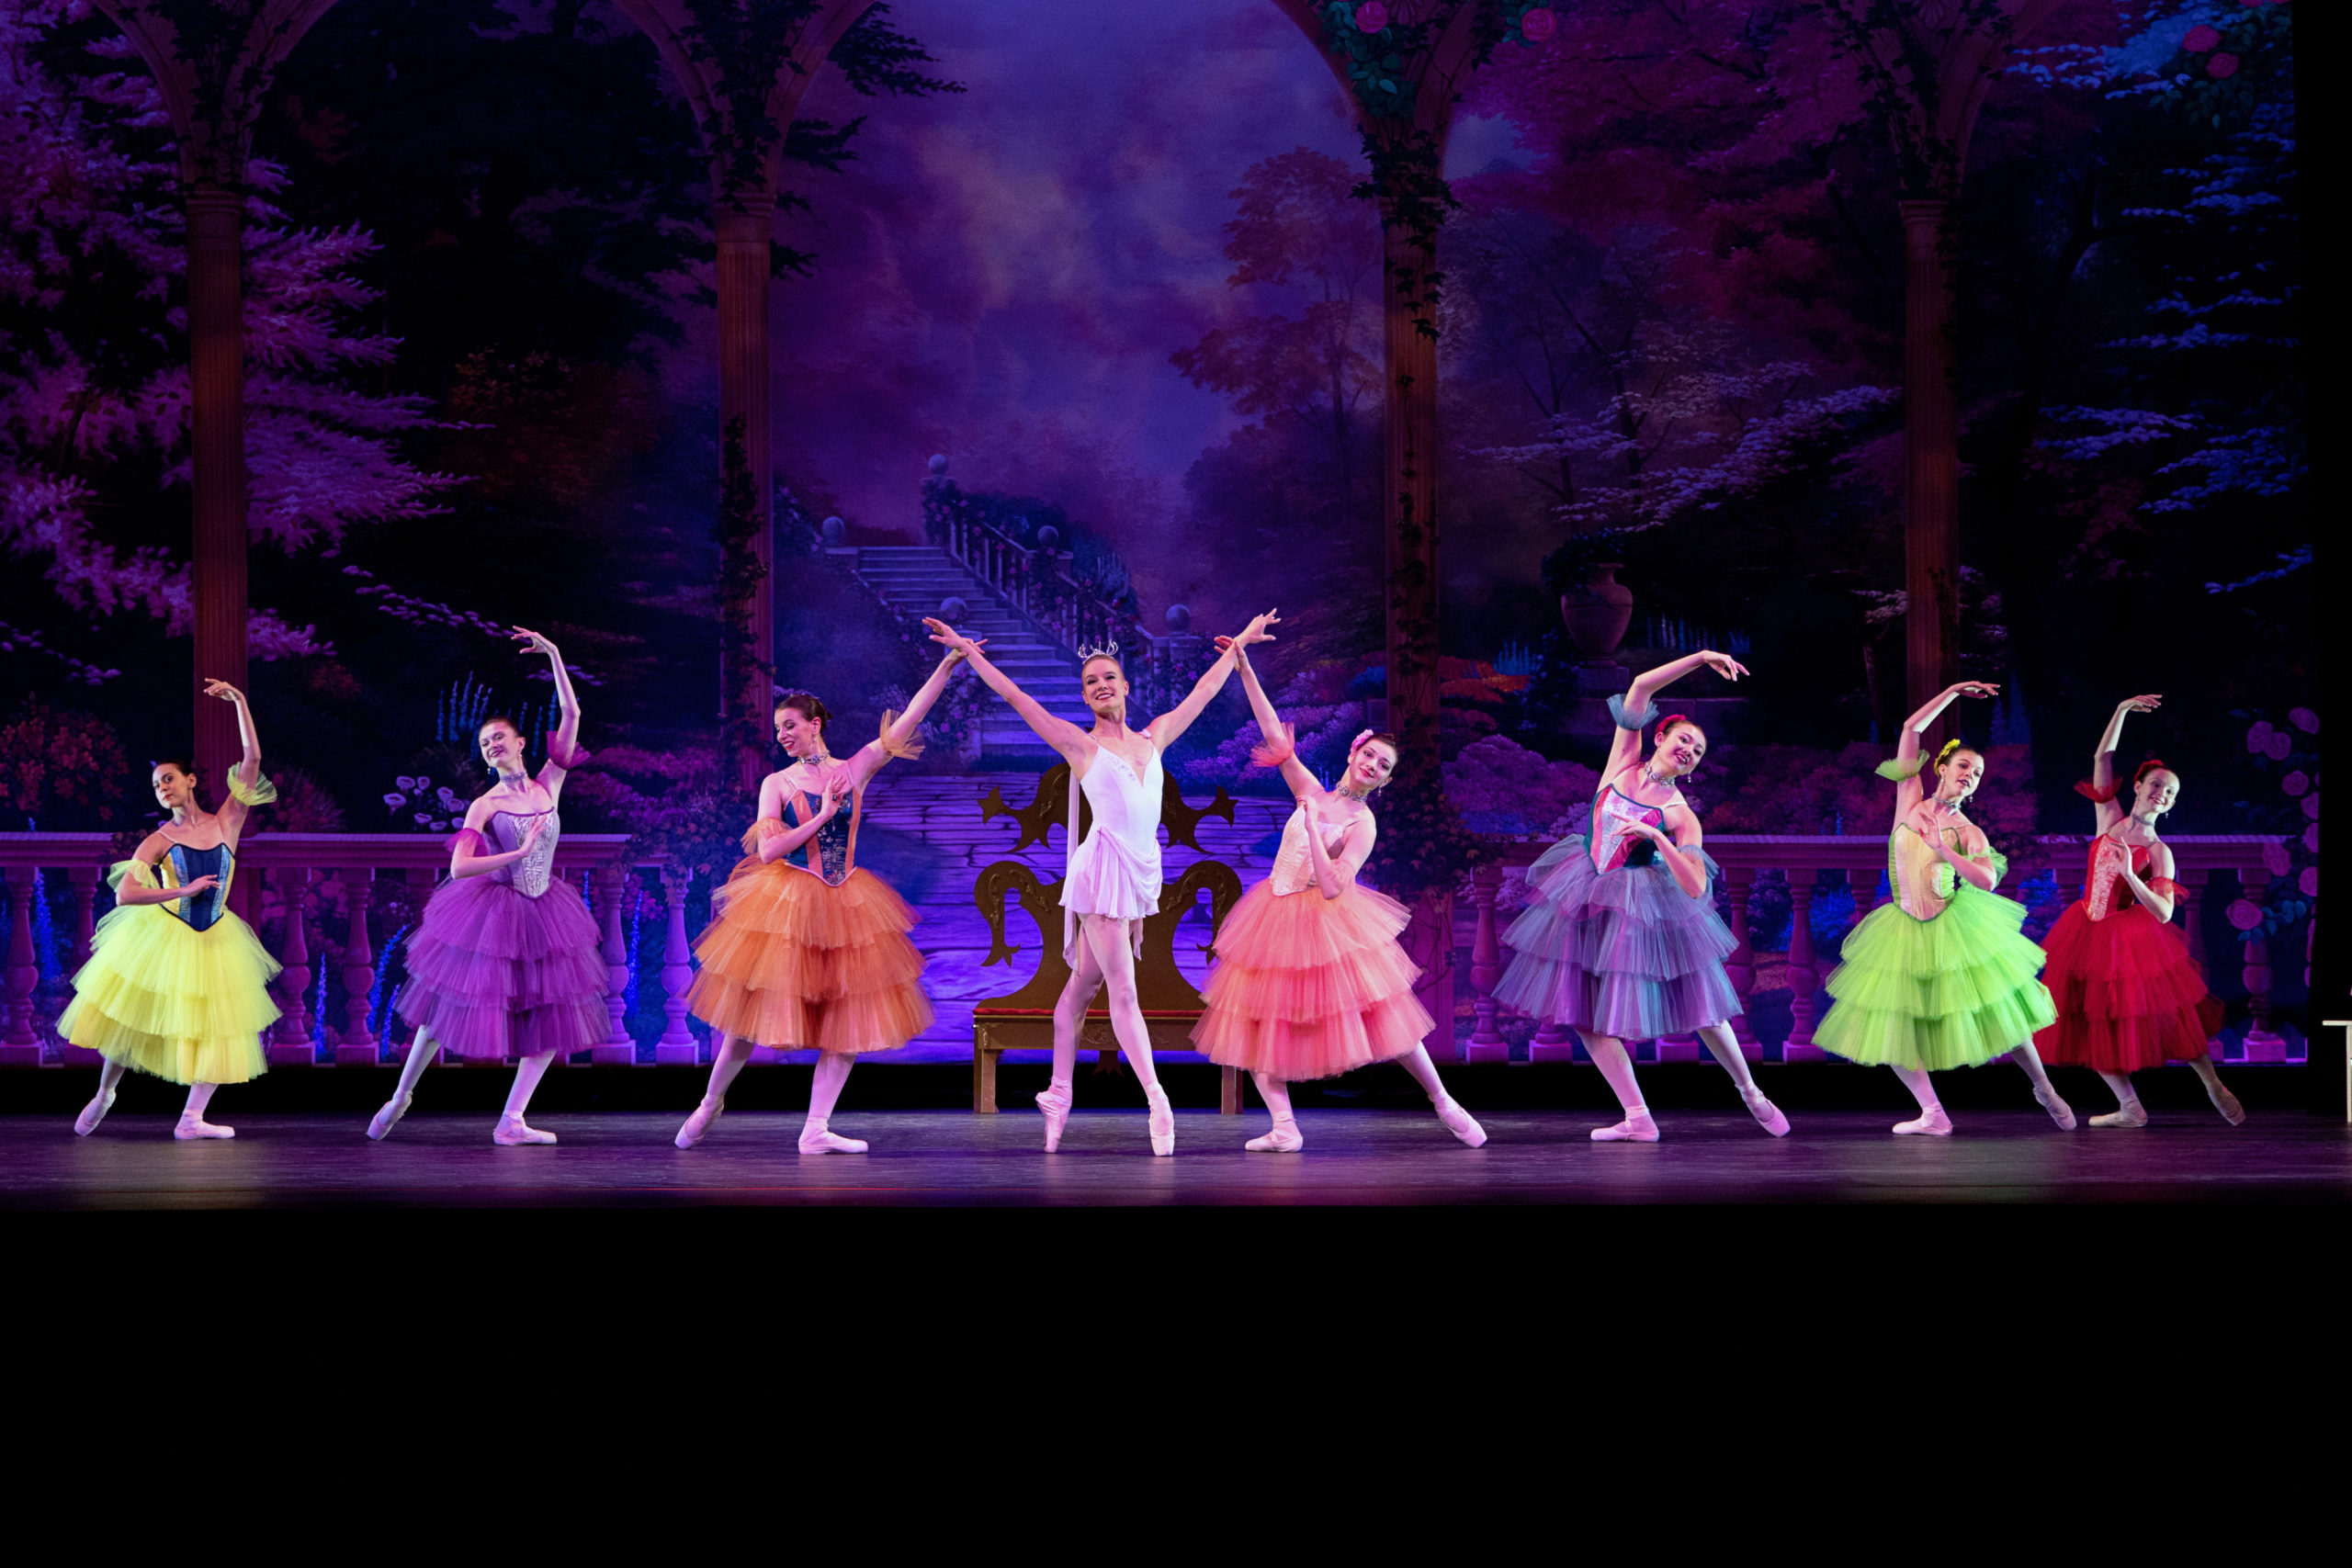 Lauren Strenoos, in a short, white dance dress, pink tights and pointe shoes, poses center stage in a fourth position on pointe, her arms in a wide V-shape. A line of corps women are on either side of her in a tendu derriere, with their inside leg in plié. They wear brightly colored, Spanish-style long tutus and pointe shoes. The two closest to Strenoos hold on to her wrists.